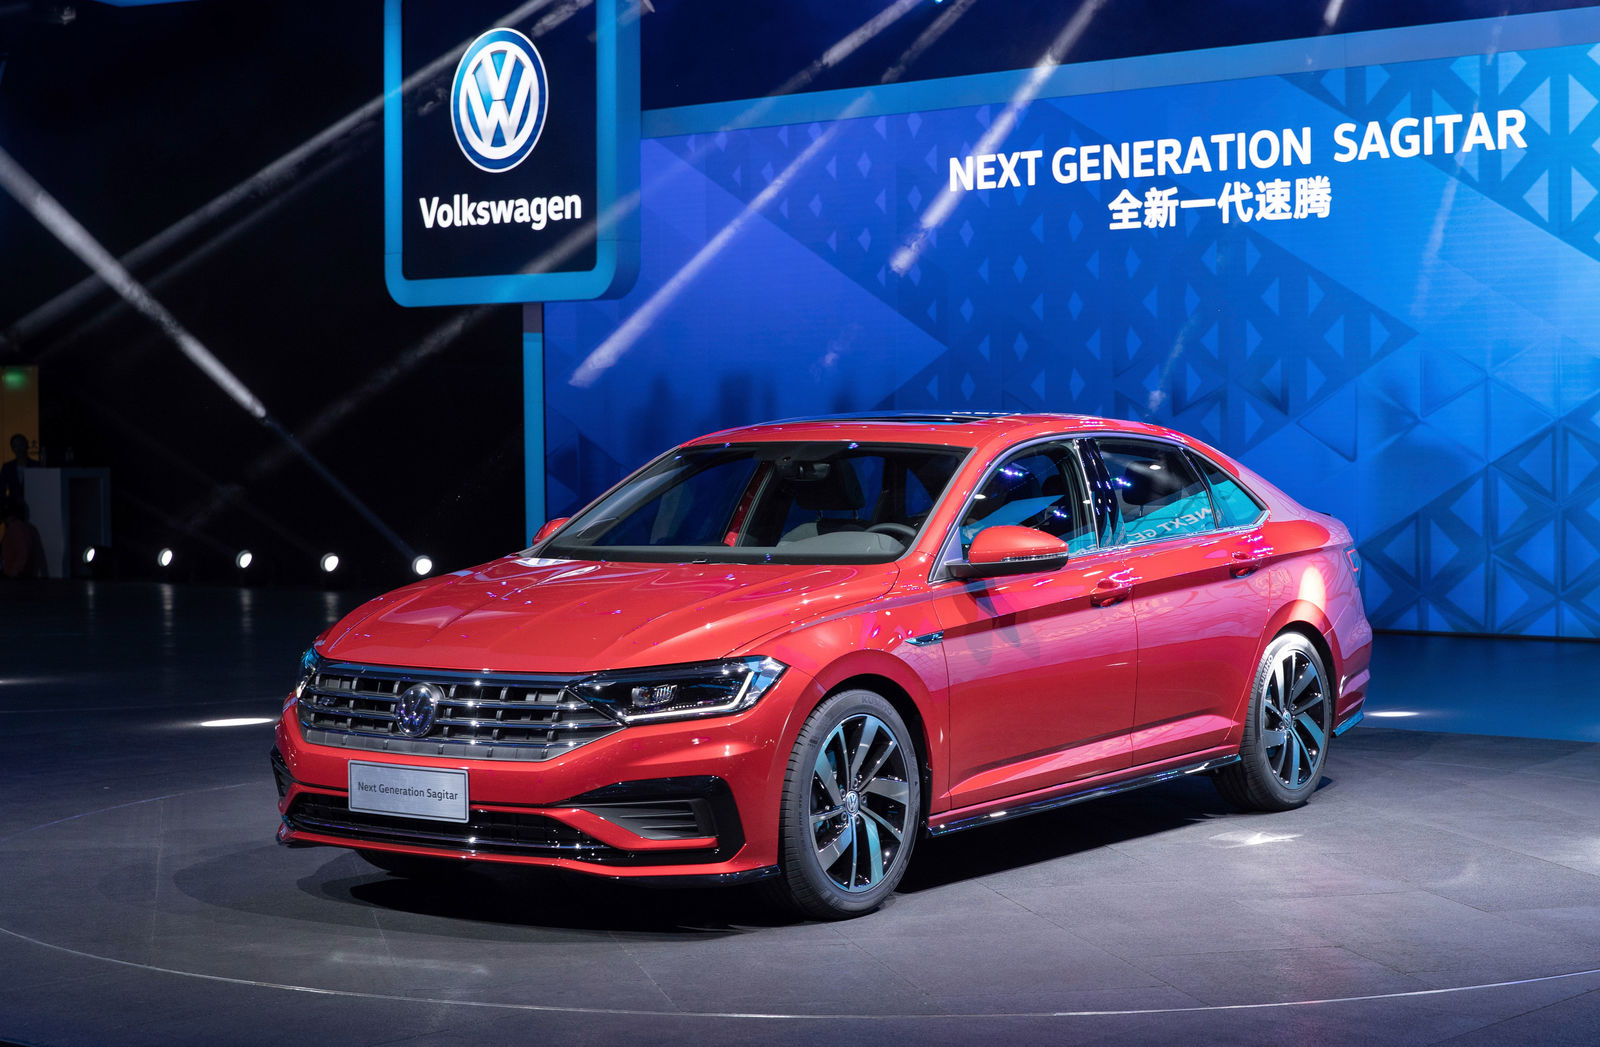 Volkswagen Press Conference at Shanghai Auto Show 2019